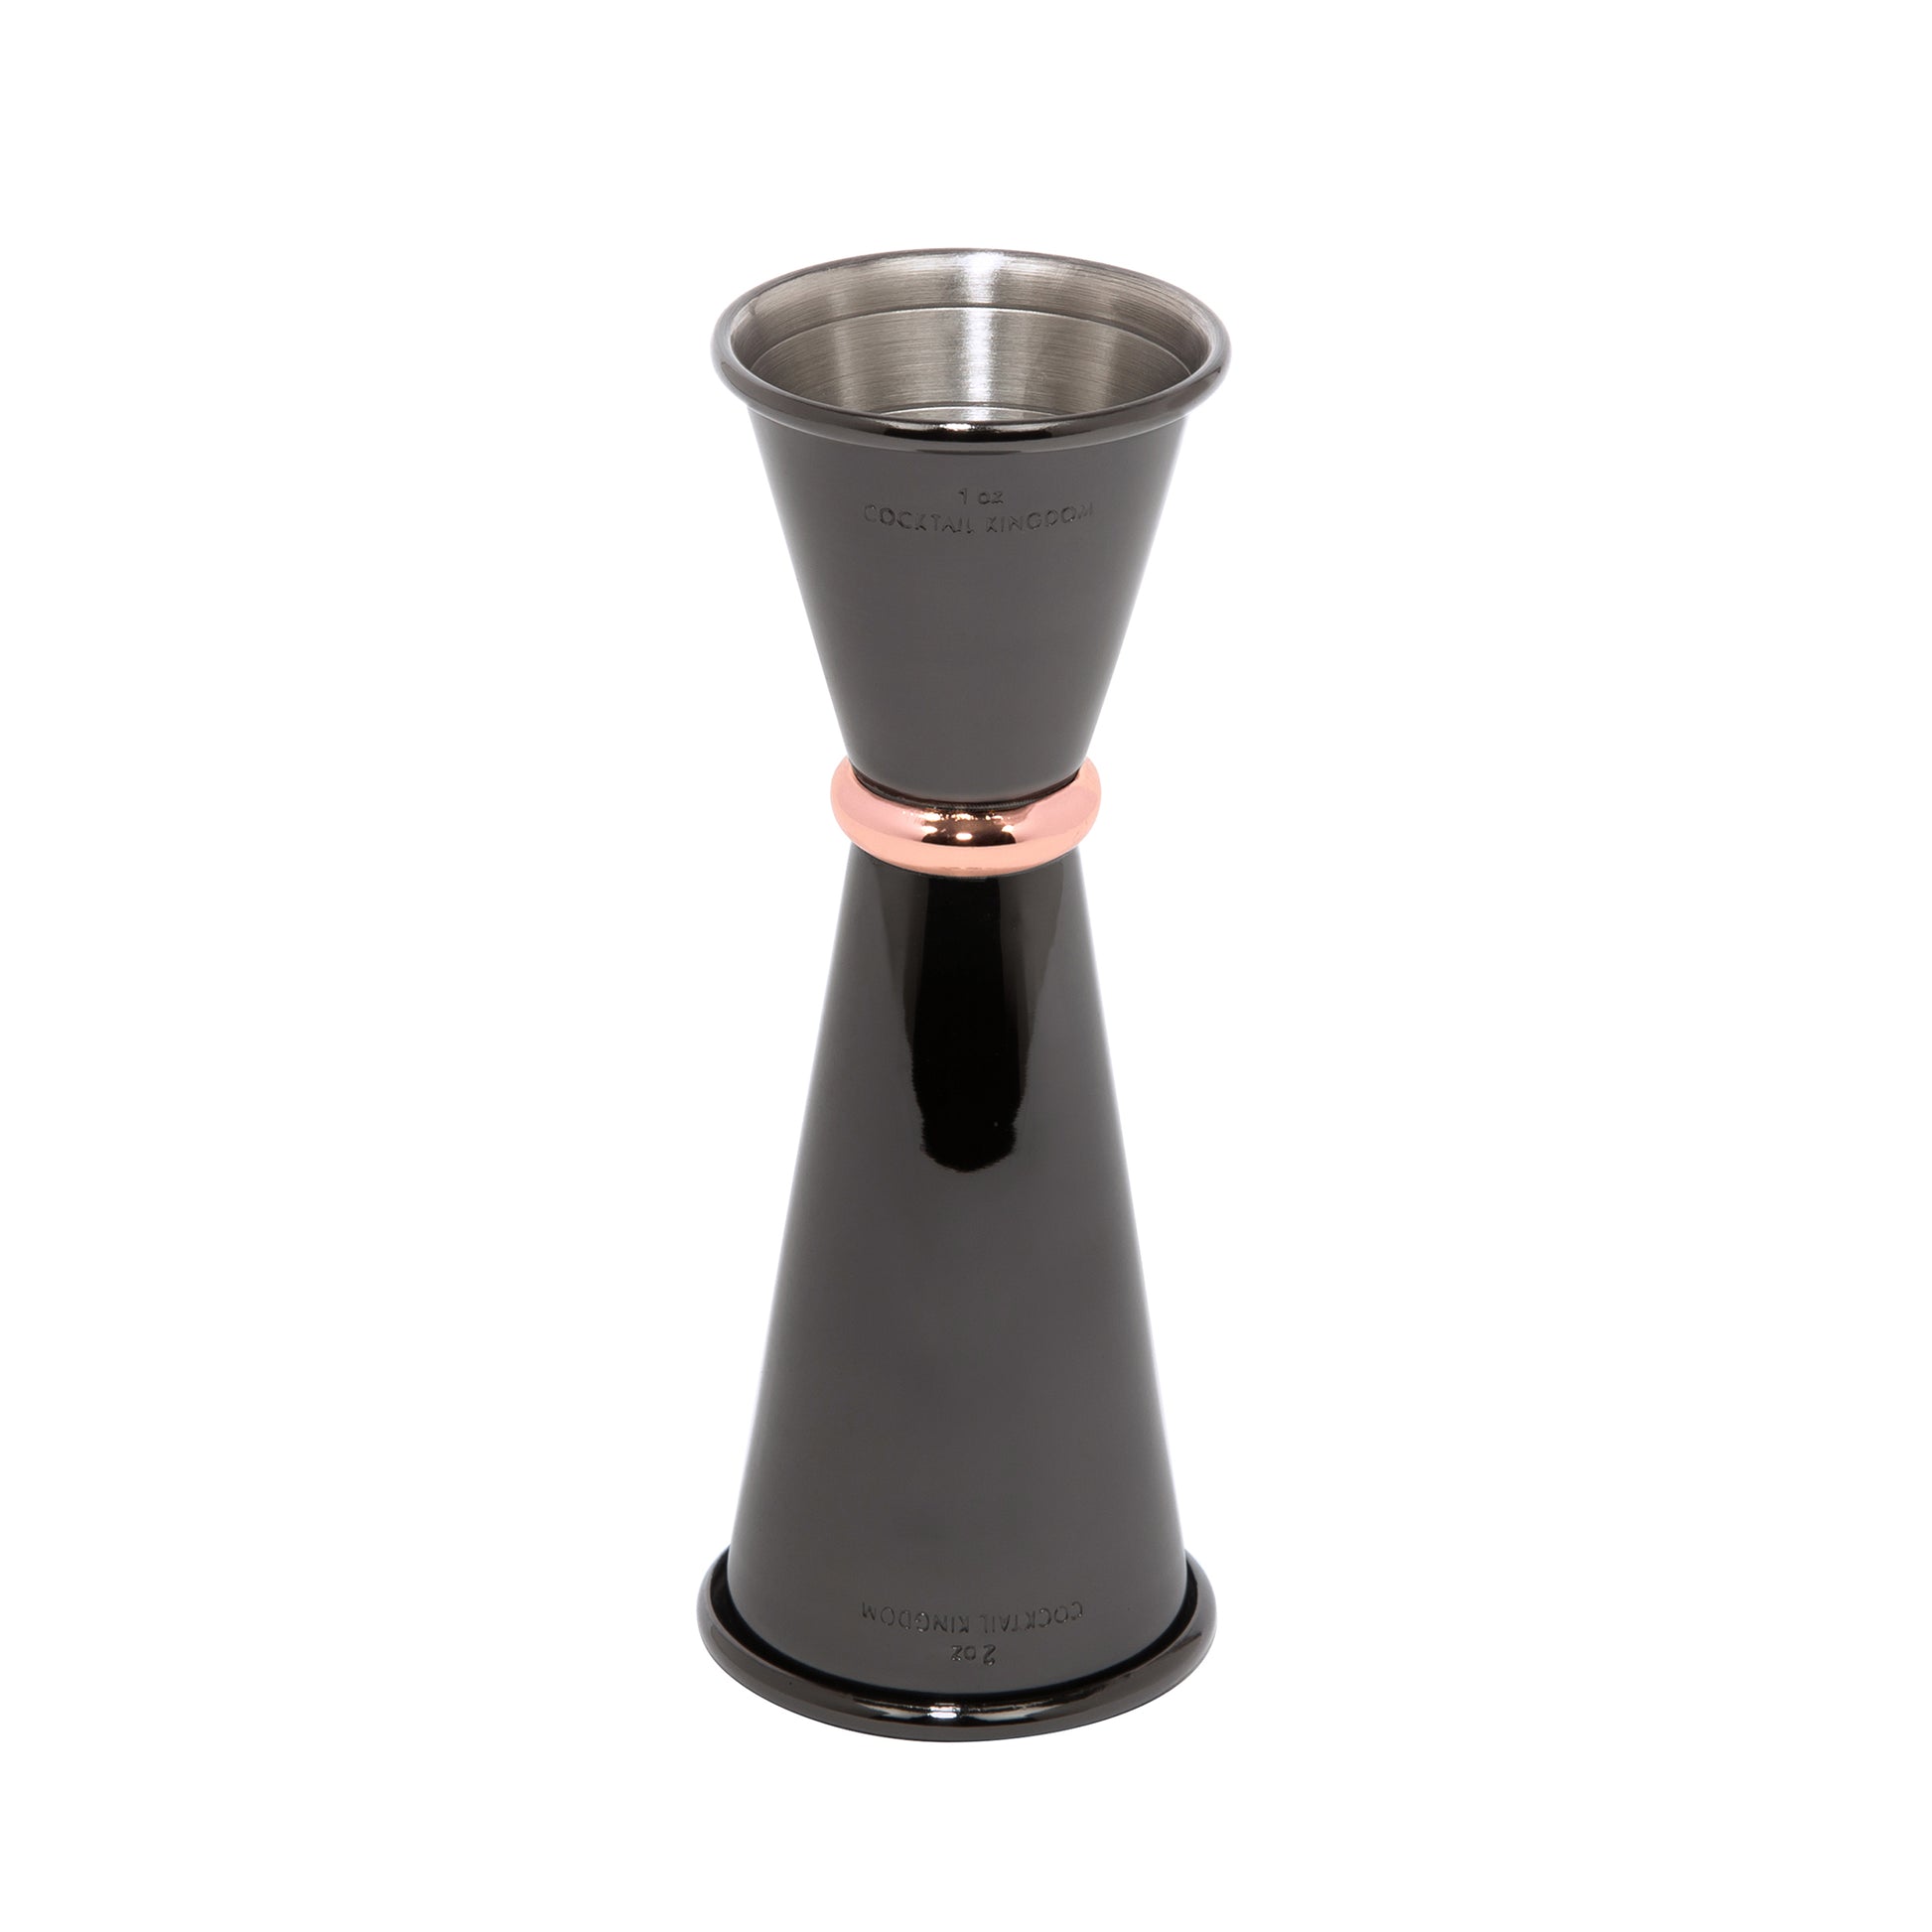 Urban Bar Ginza Japanese Style Cocktail Jigger - Copper Plated Steel - 1 oz  & 2 oz with Interior Fill Lines